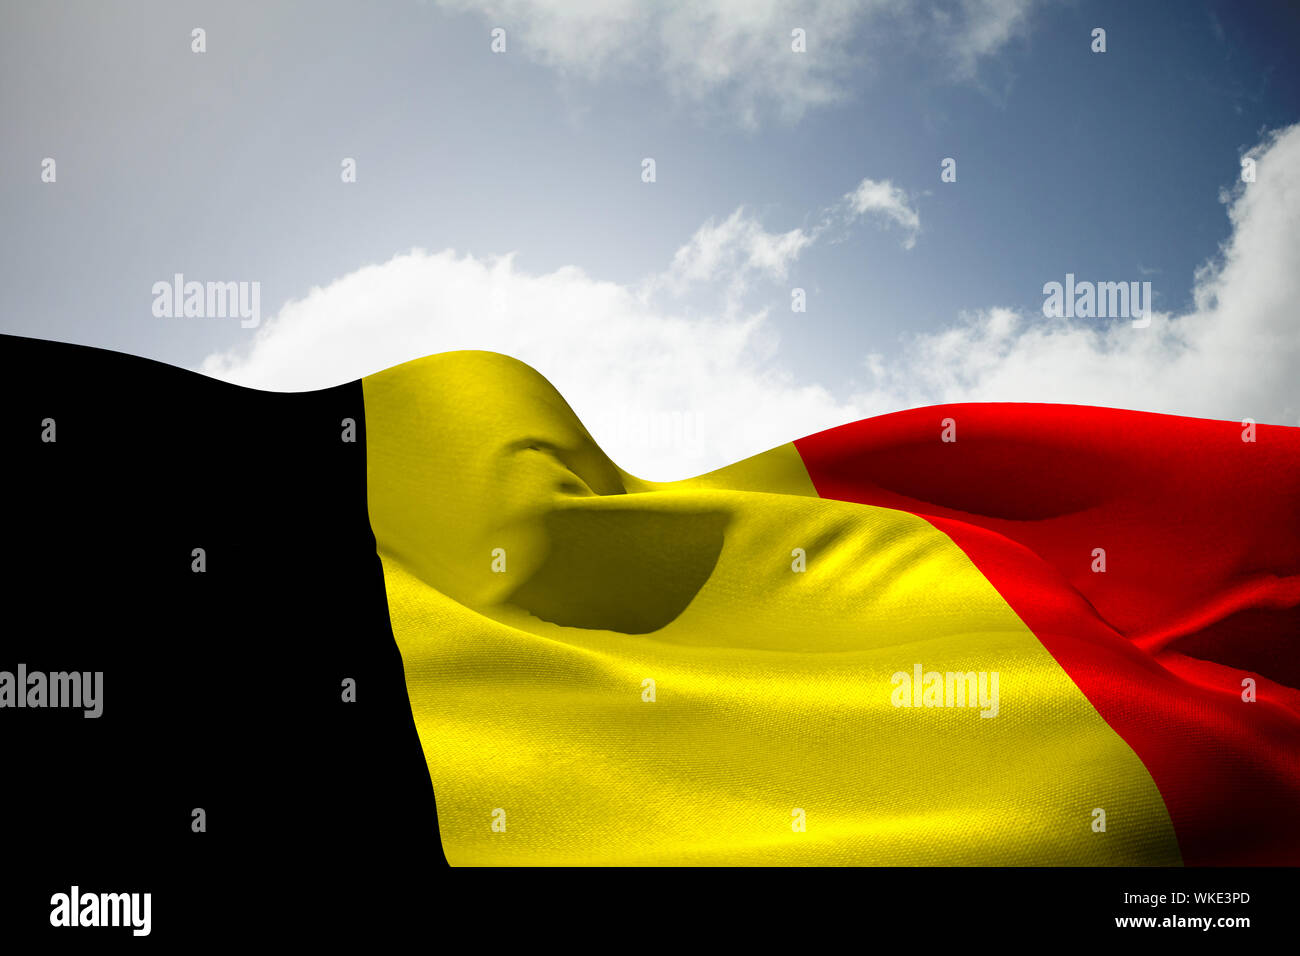 Belgium flag waving against bright blue sky with clouds Stock Photo